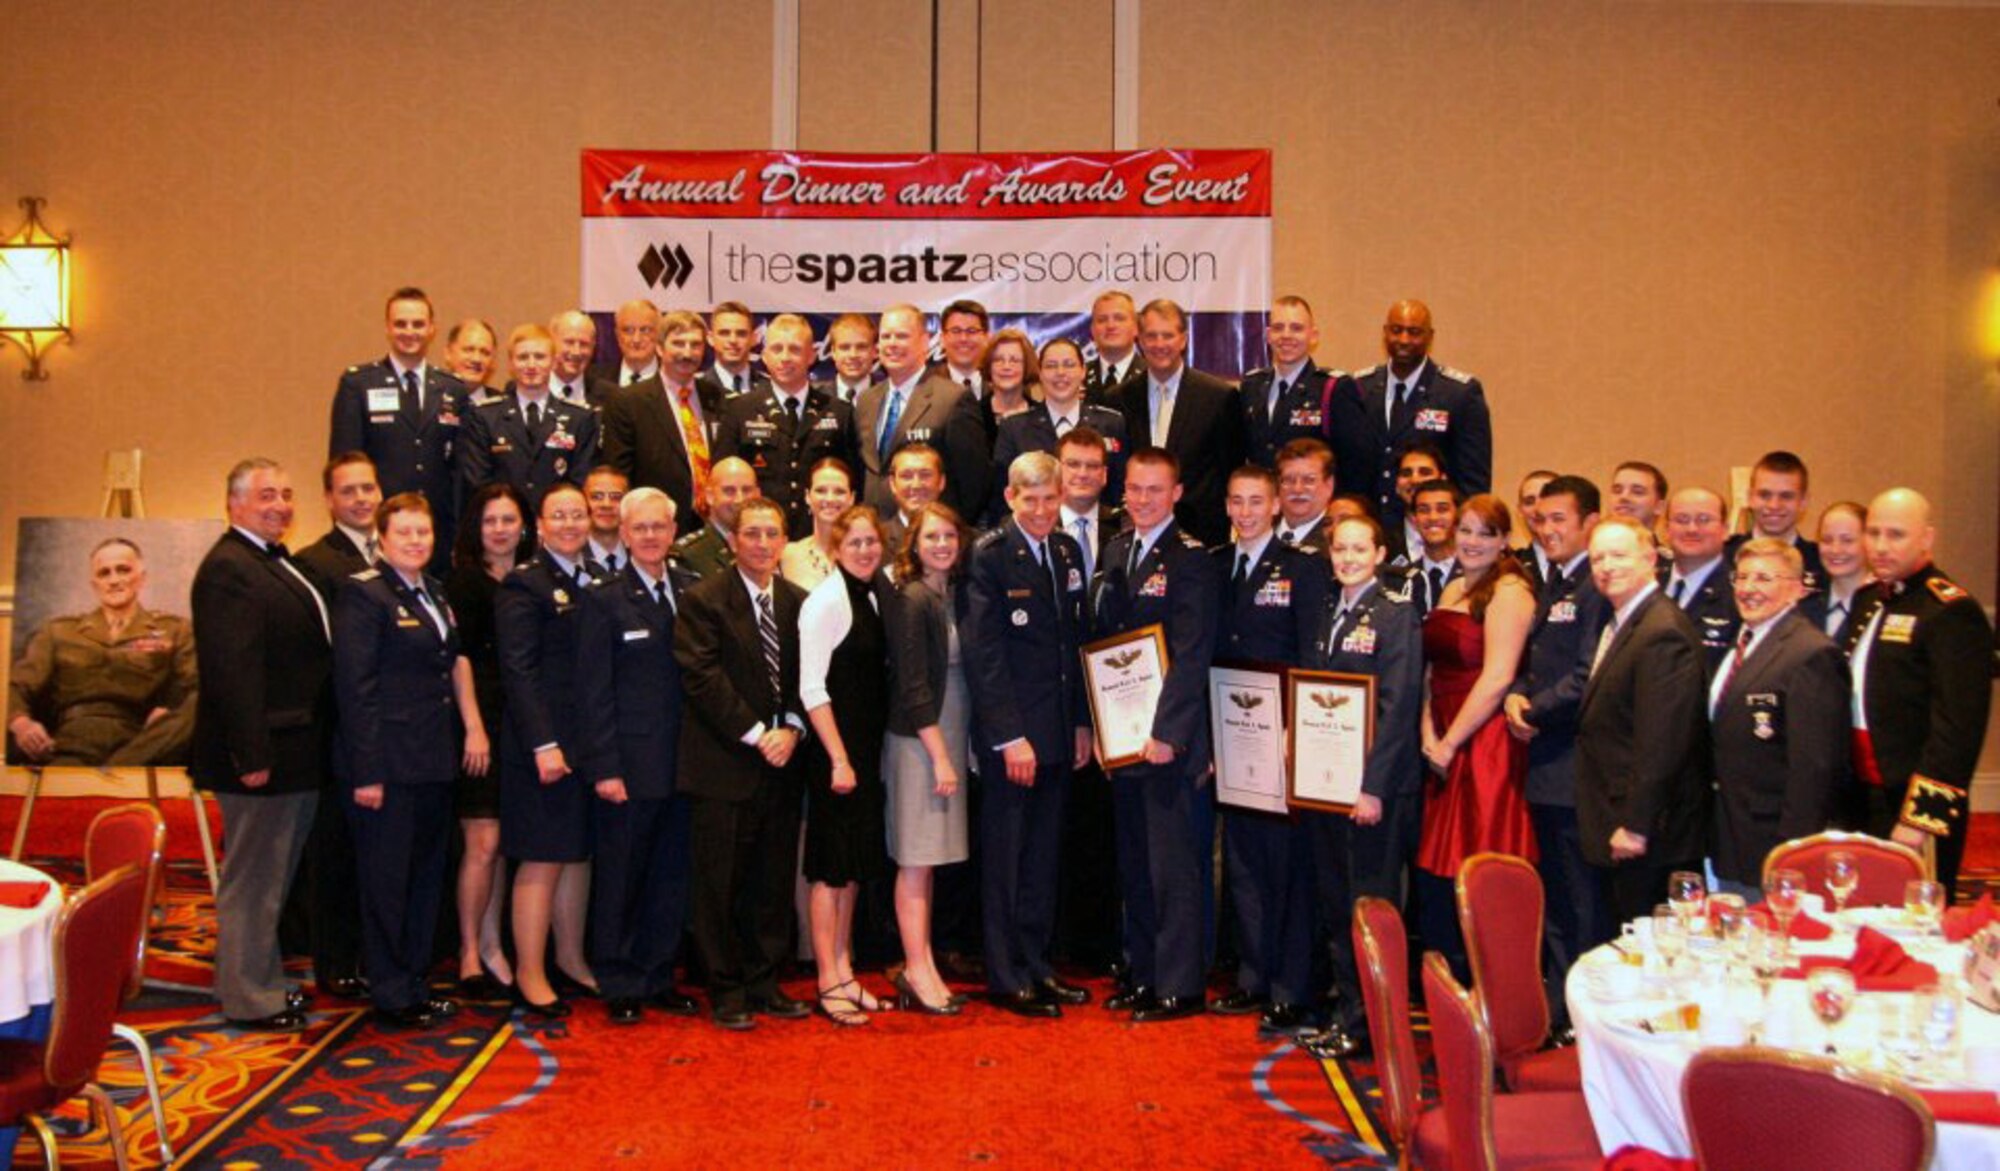 Spaatz Association group photo. All members are currently or have been Spaatz Cadets and are posing with Gen Schwartz the AFCOS. Photograph submitted by Senior Airman Jonathan Khattar. 